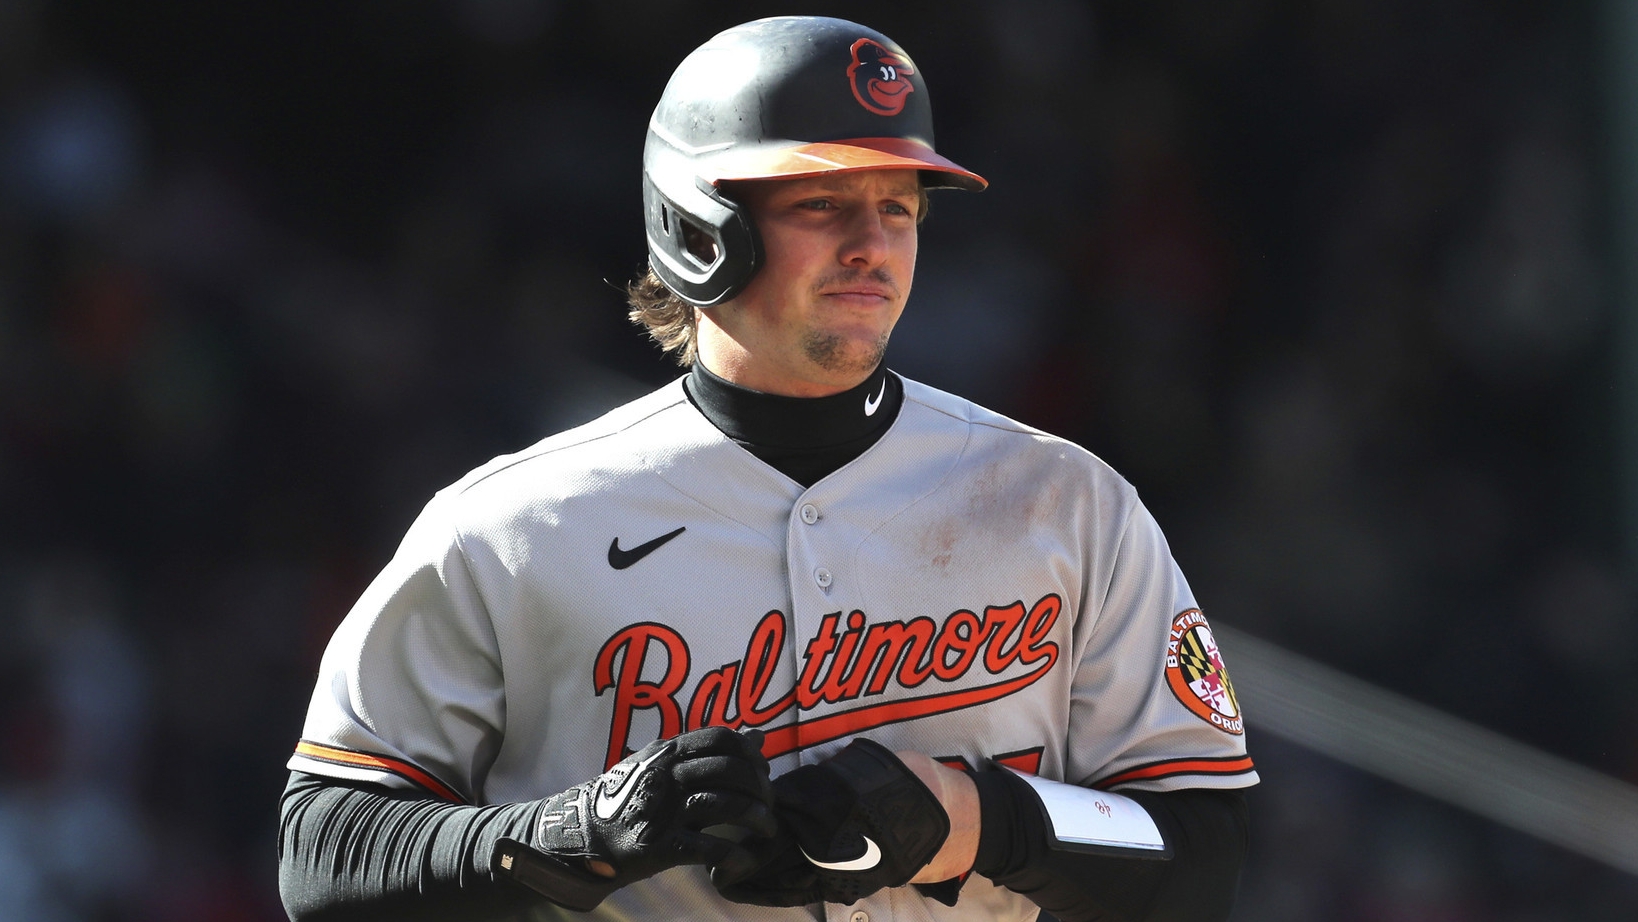 How much would an Adley Rutschman contract extension cost the Orioles?